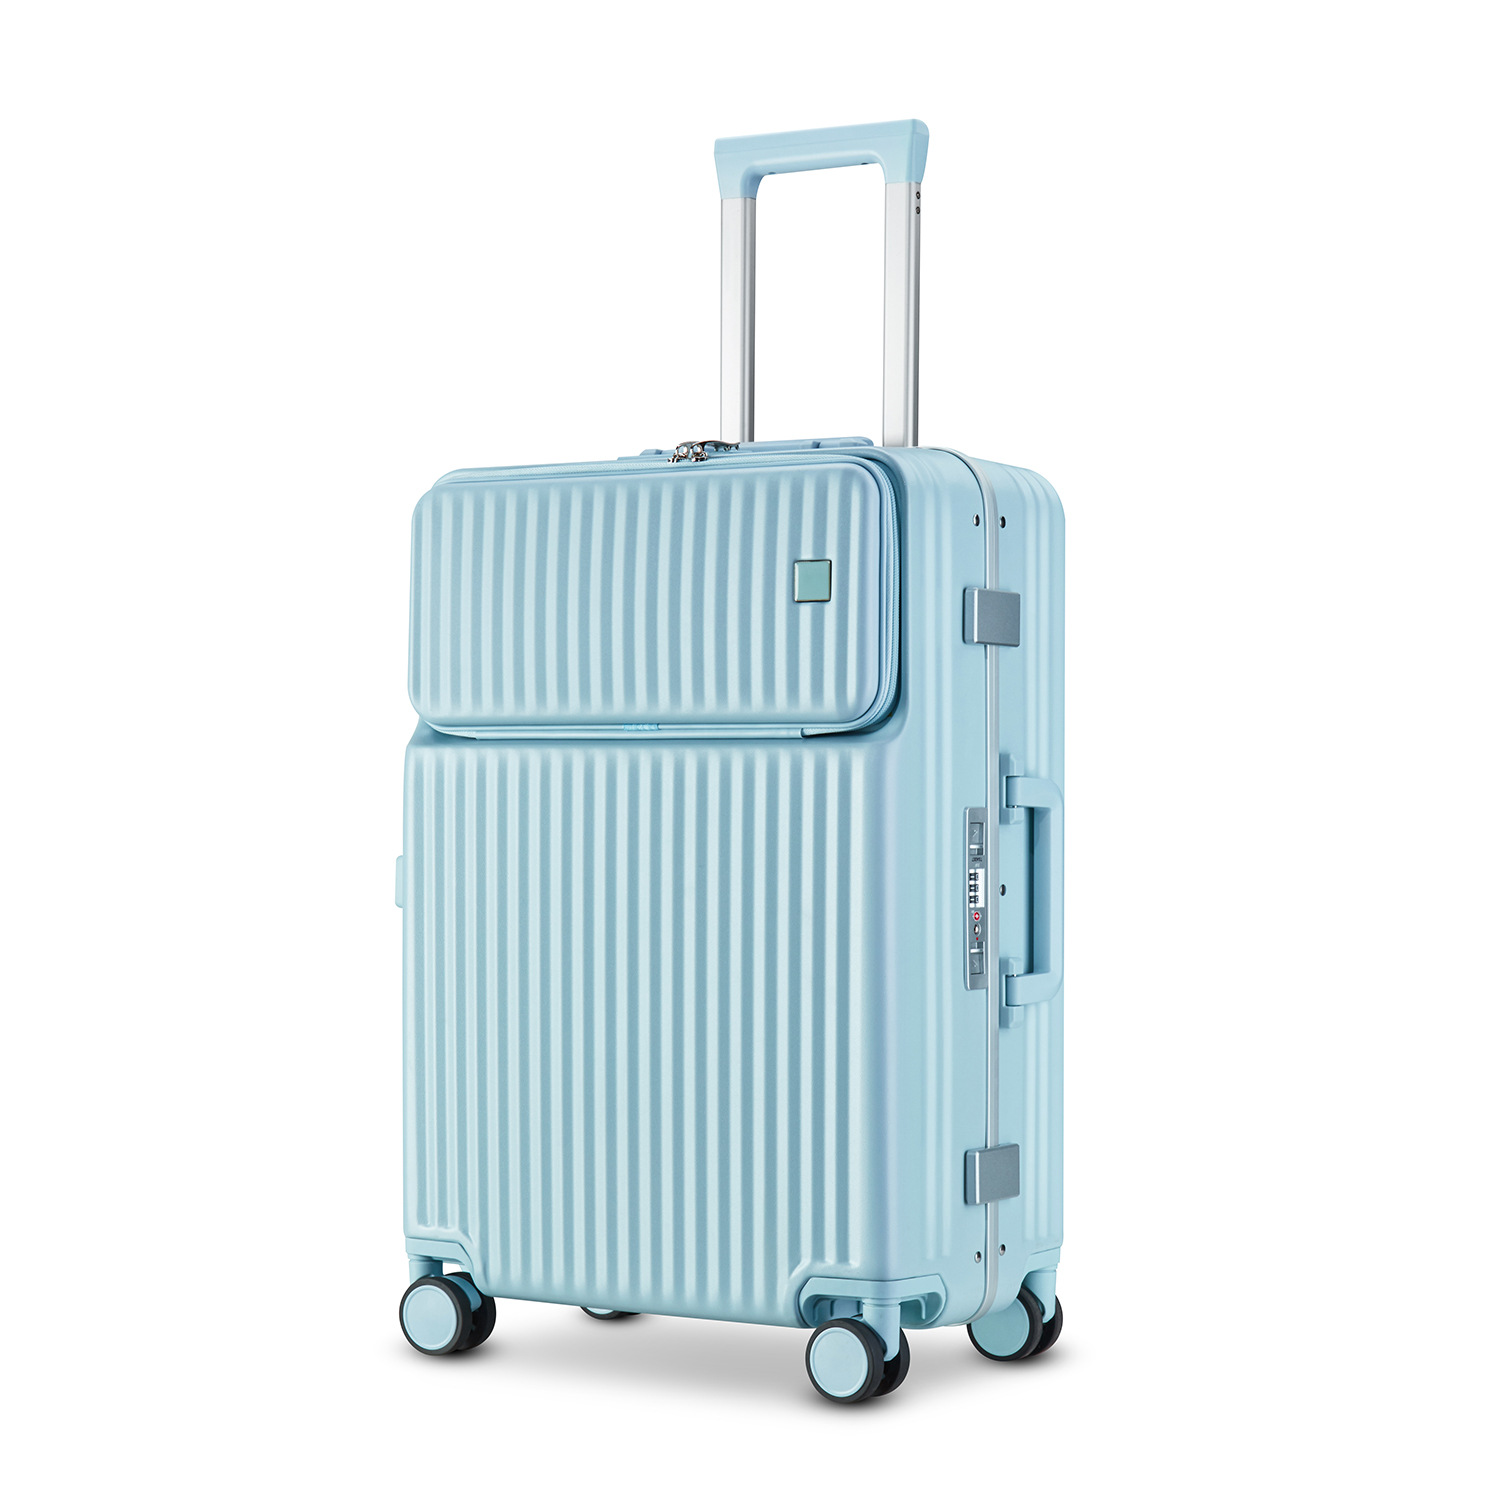 Front Open Aluminum Frame Trolley Case Candy Color Travel Carry-on Luggage Suitcase Boarding Password Suitcase Luggage